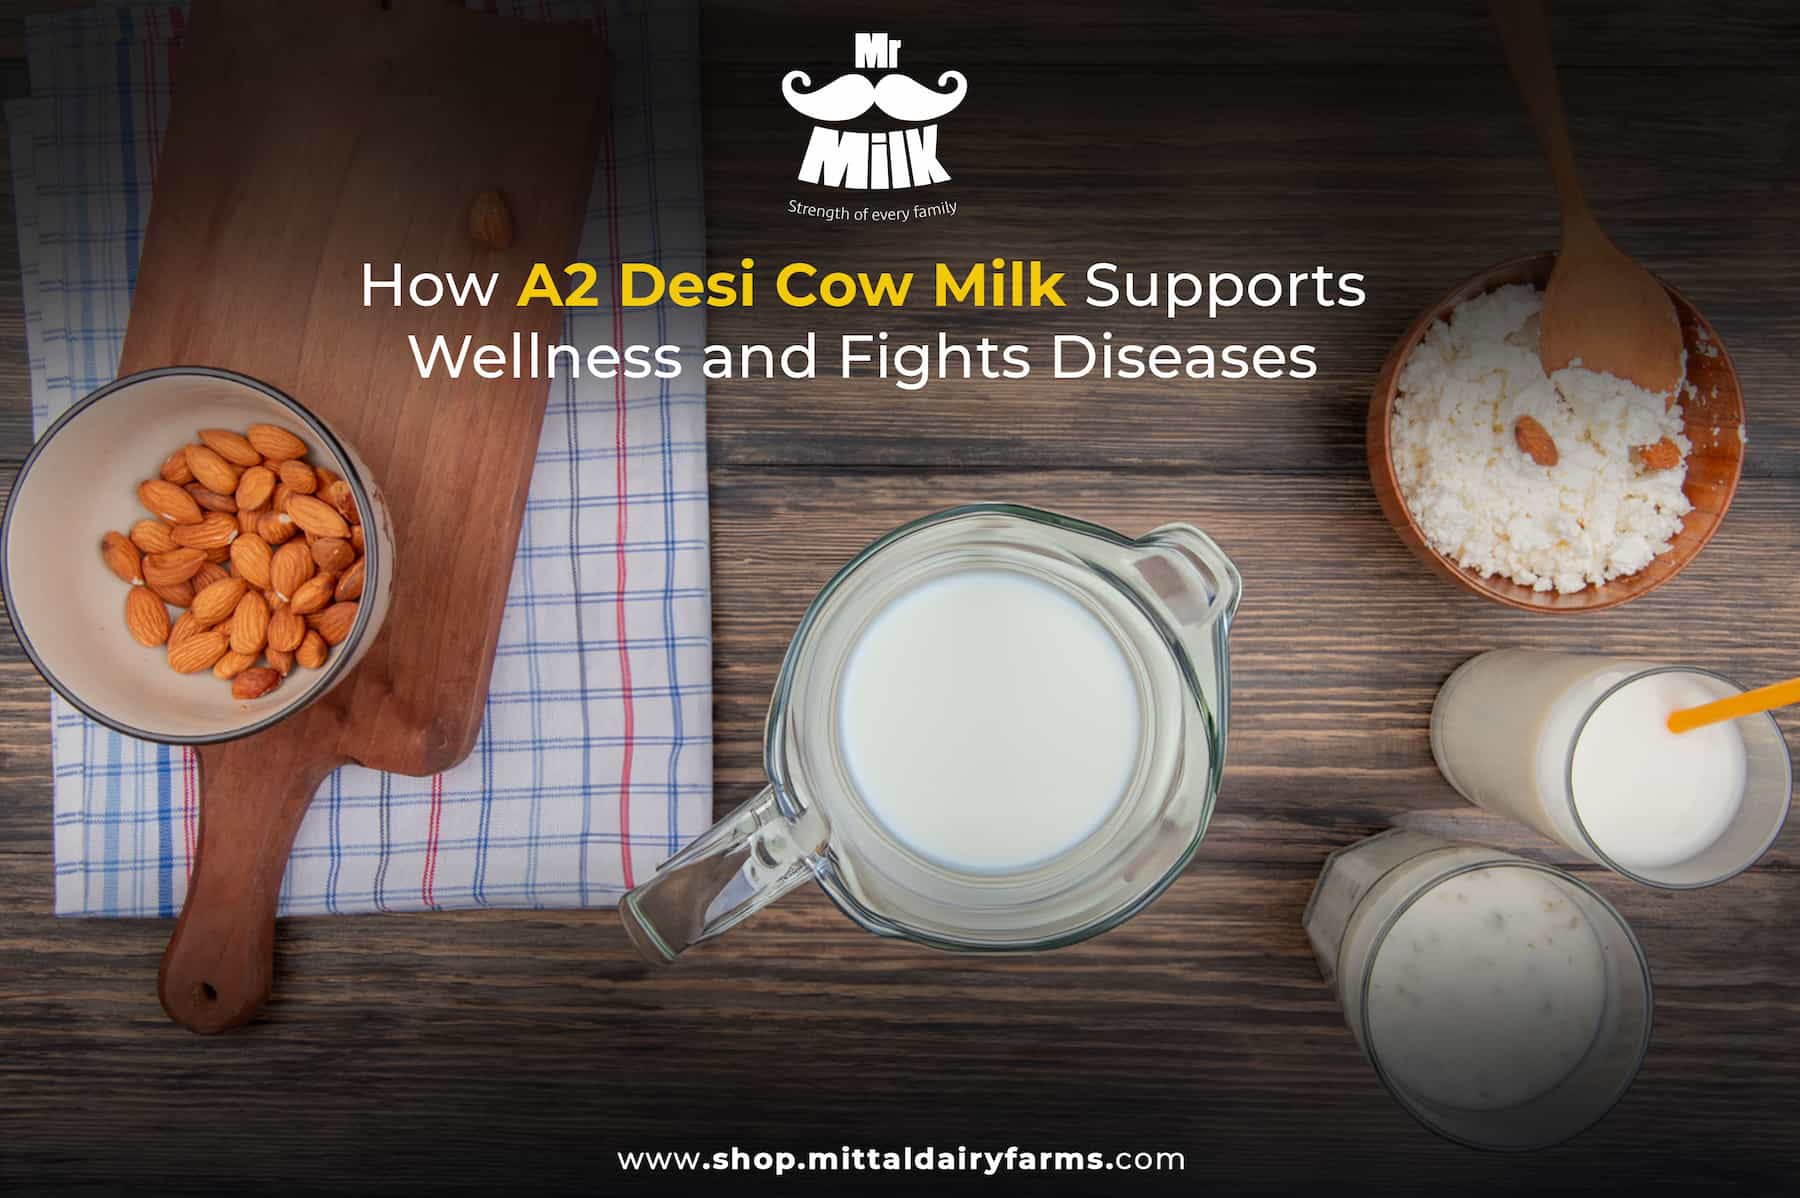 A2 Desi Cow Milk Benefits and How It Supports Wellness and Fights Diseases